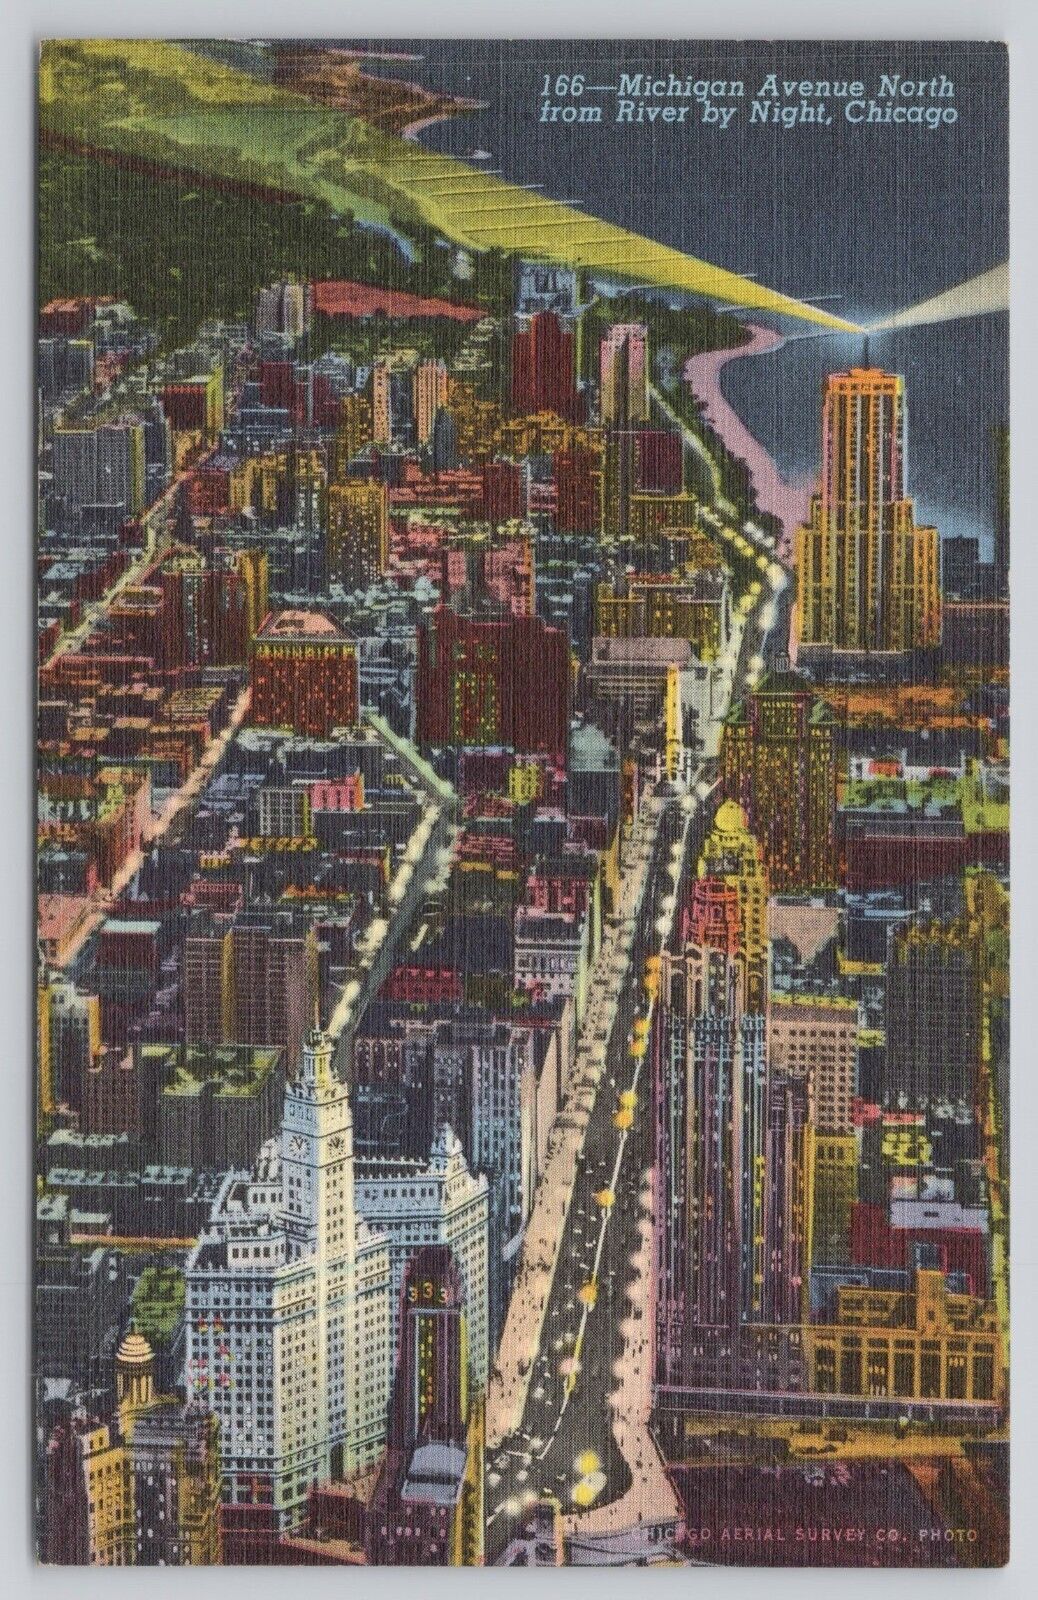 Chicago Illinois IL, Aerial View of Michigan Ave at Night 1942 Linen Postcard